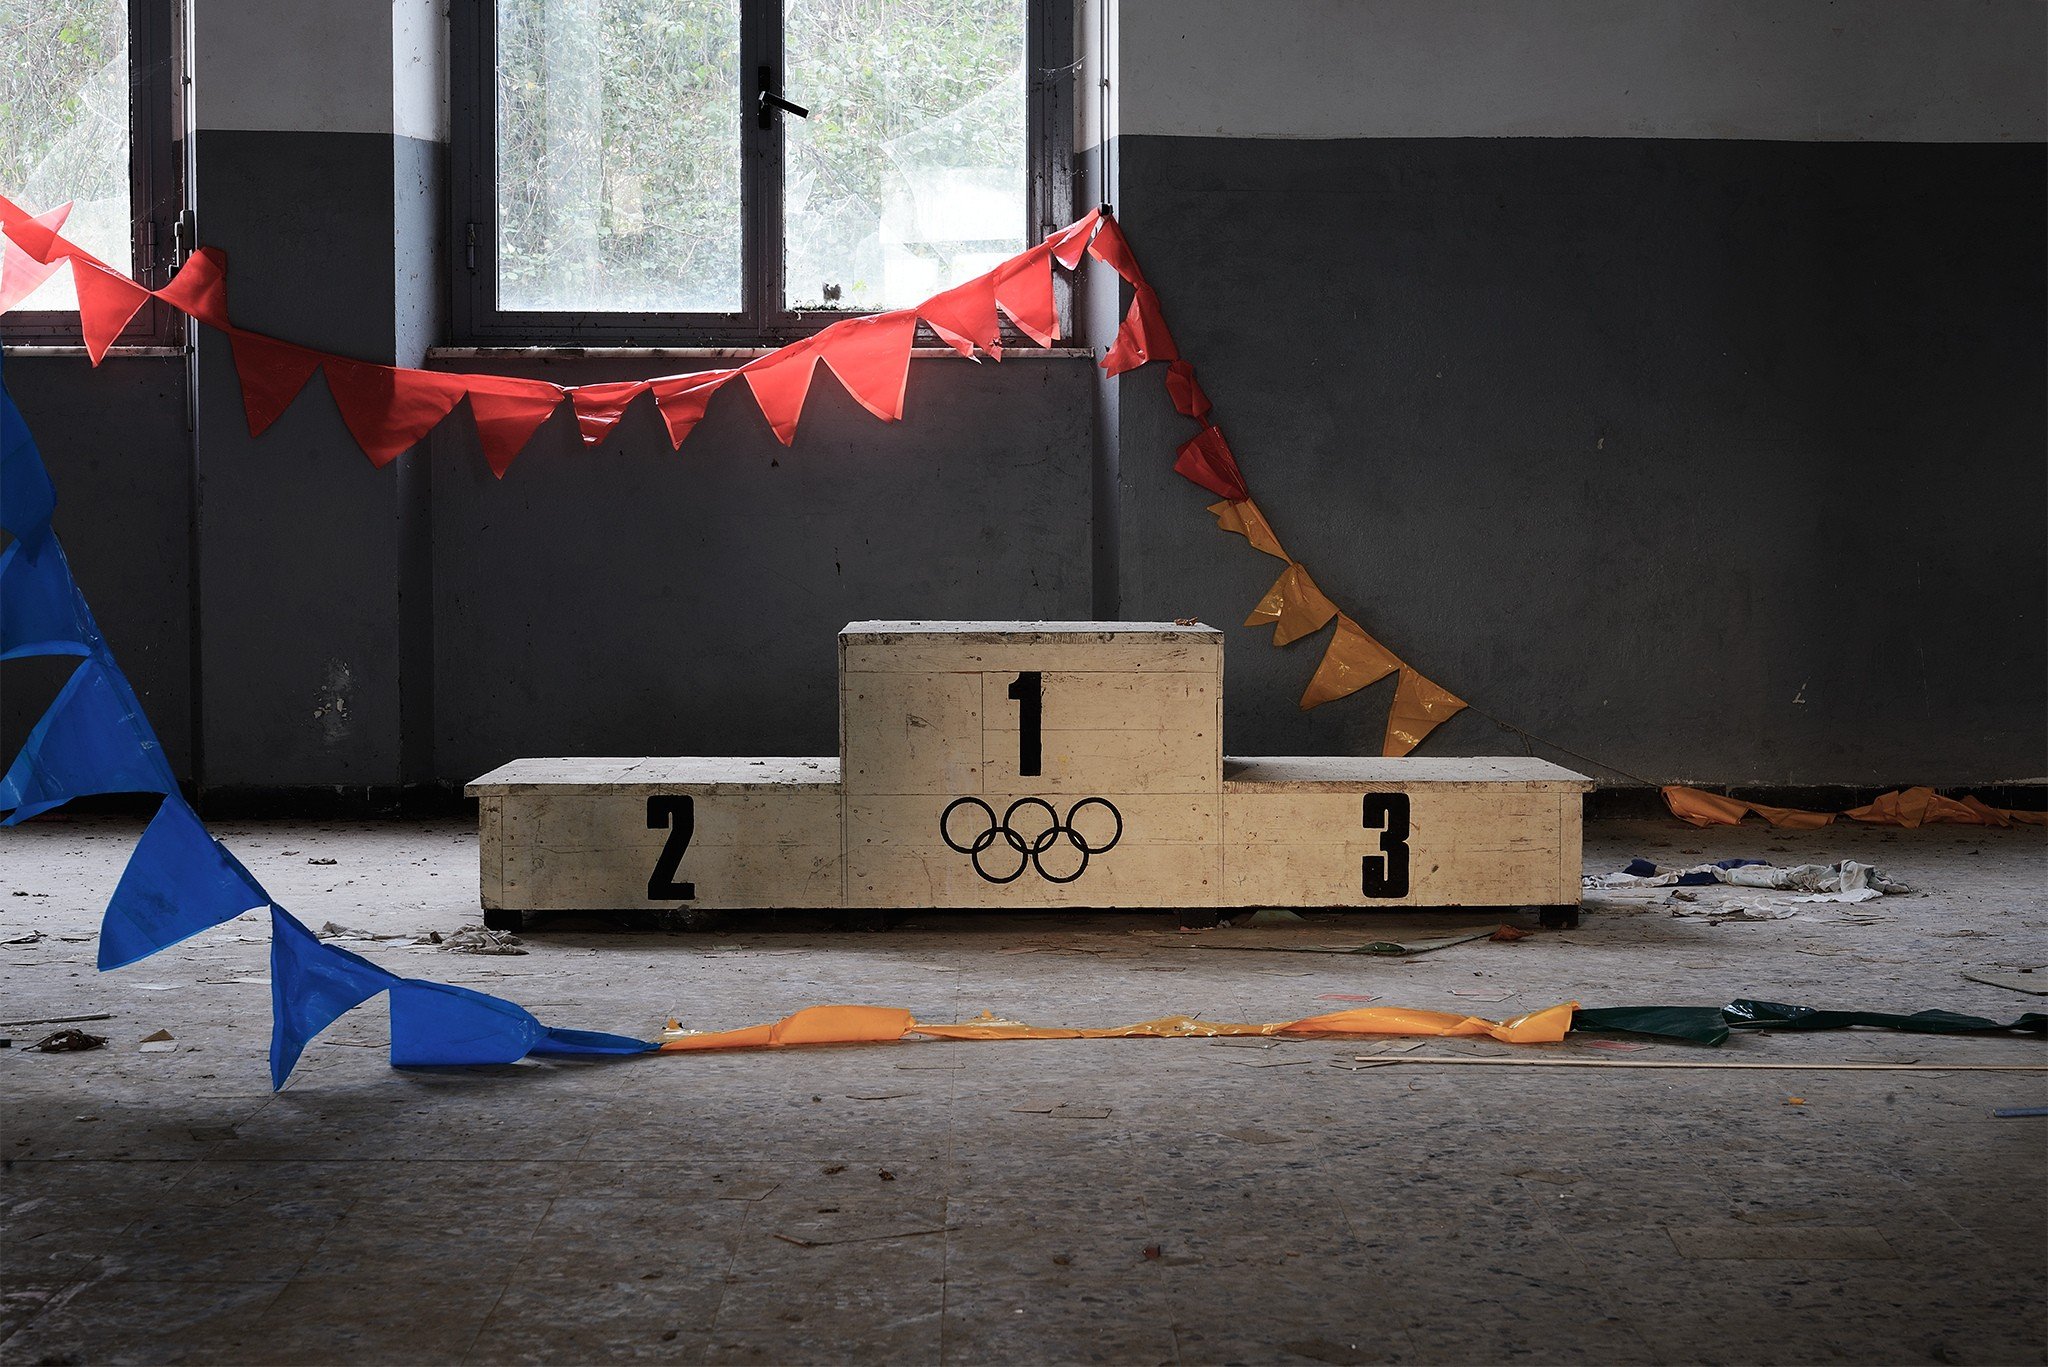 abandoned, Interiors, Podiums, Olympics, Flag, Window, Walls, Stages, On the floor Wallpaper